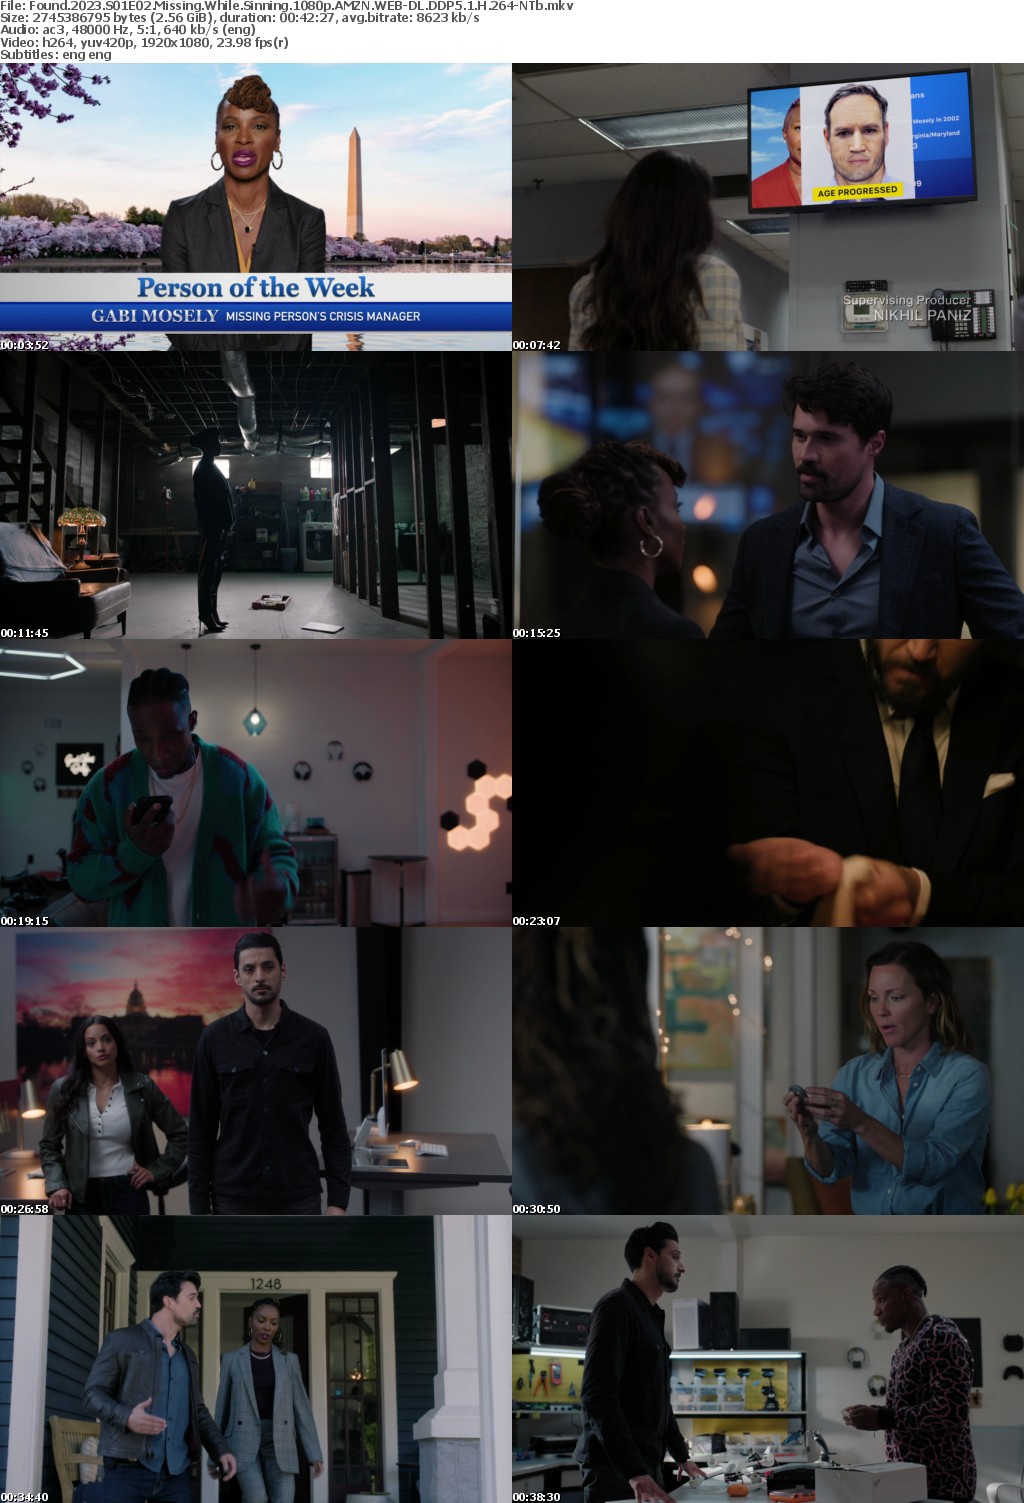 Found 2023 S01E02 Missing While Sinning 1080p AMZN WEB-DL DDP5 1 H 264-NTb